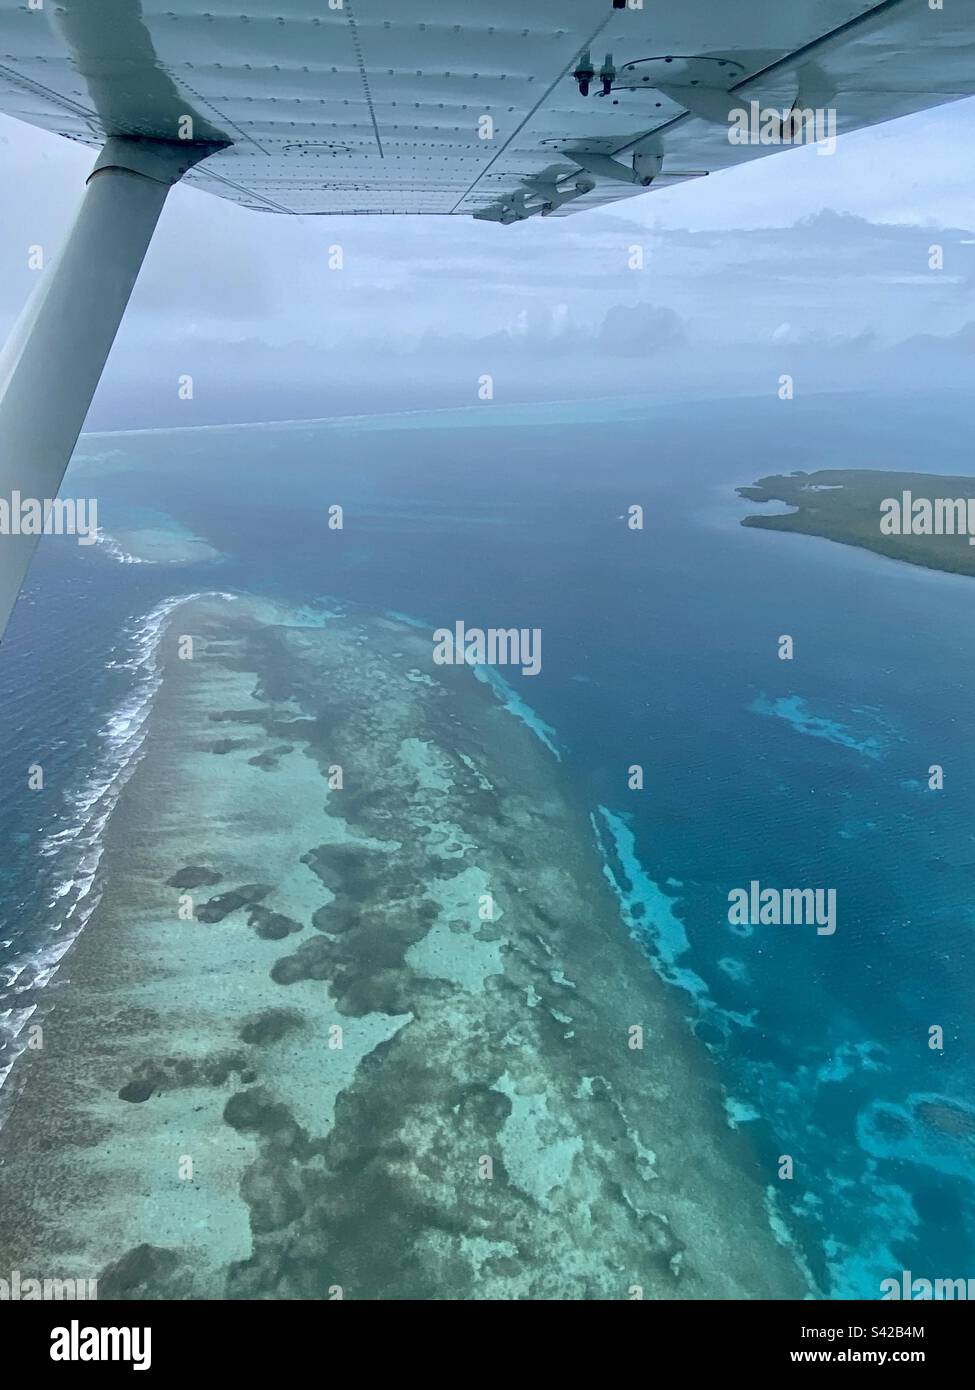 Mixed blues water in Belize Barrier Reef Reserve as viewed from a small airplane Stock Photo